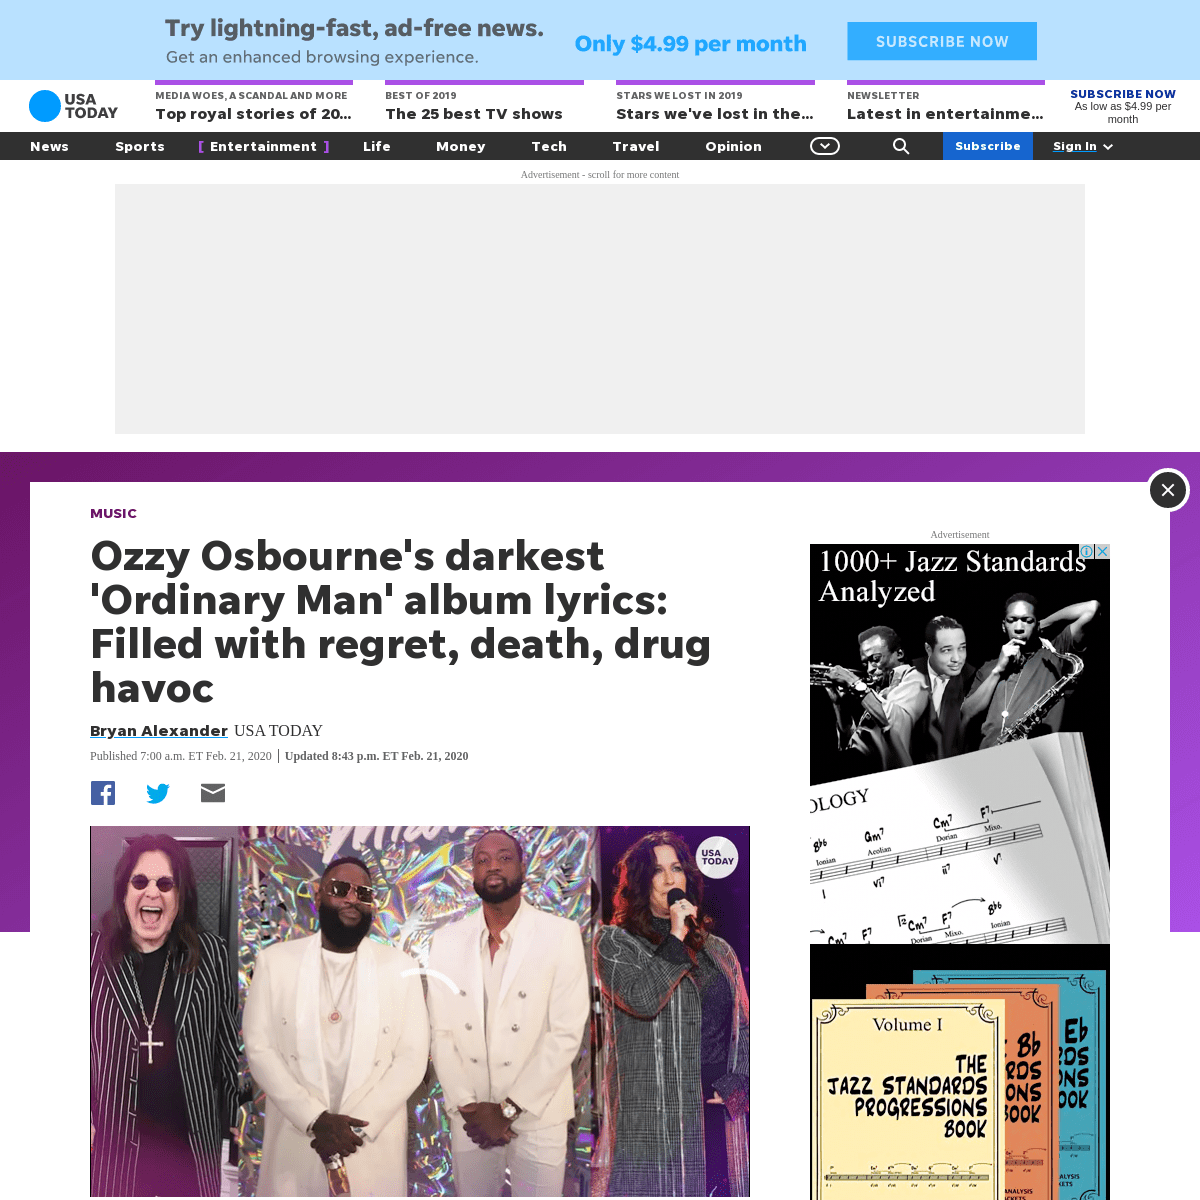 A complete backup of www.usatoday.com/story/entertainment/music/2020/02/21/ozzy-osbournes-ordinary-man-prince-darkness-heavy-lyr